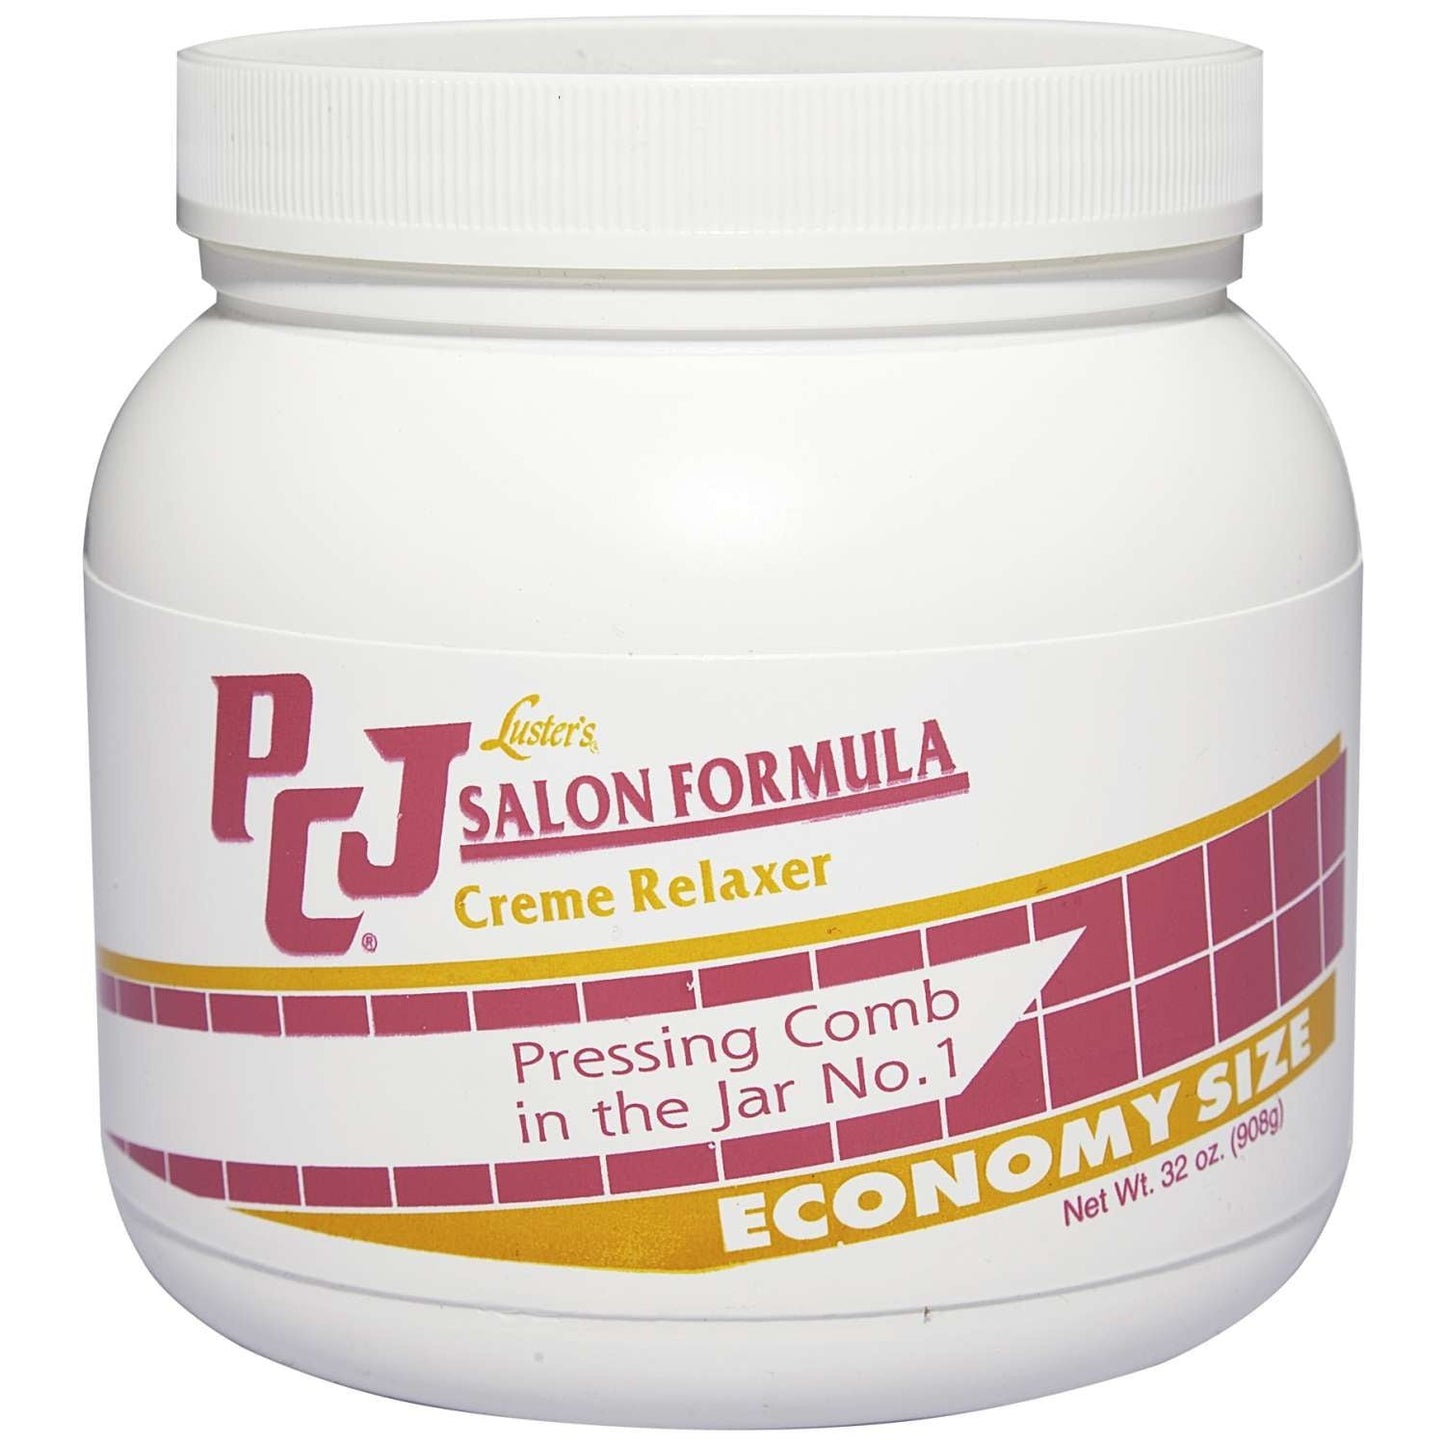 Pcj No-Base Relaxer Pressing Comb In The Jar